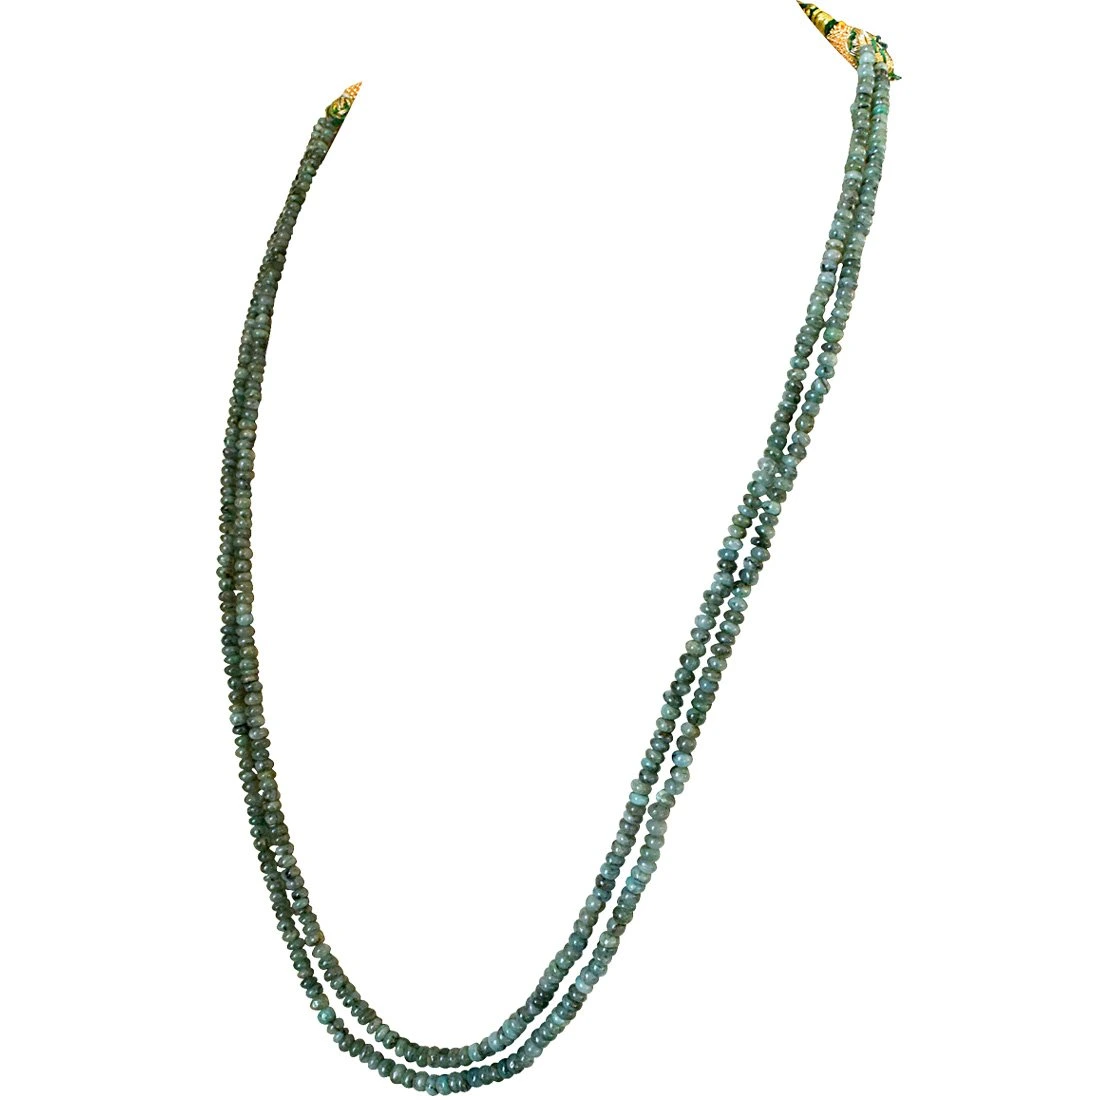 Two Line 127cts REAL Natural Green Emerald Beads Necklace for Women (127cts EMR Neck)